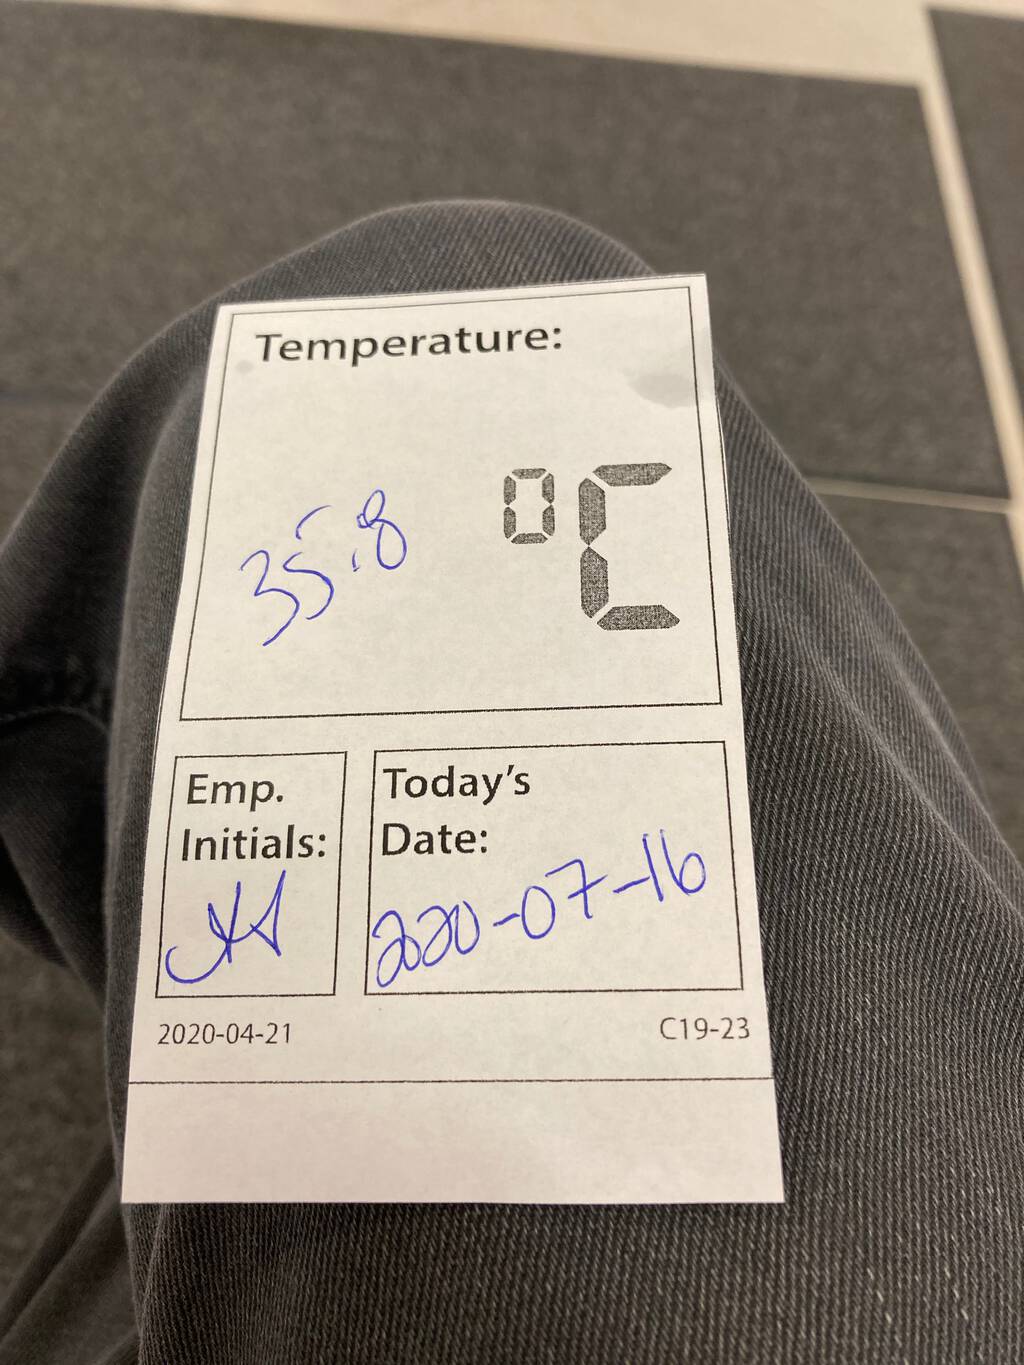 Photo of the chit recording my temperature of 35.8 degrees on arrival.